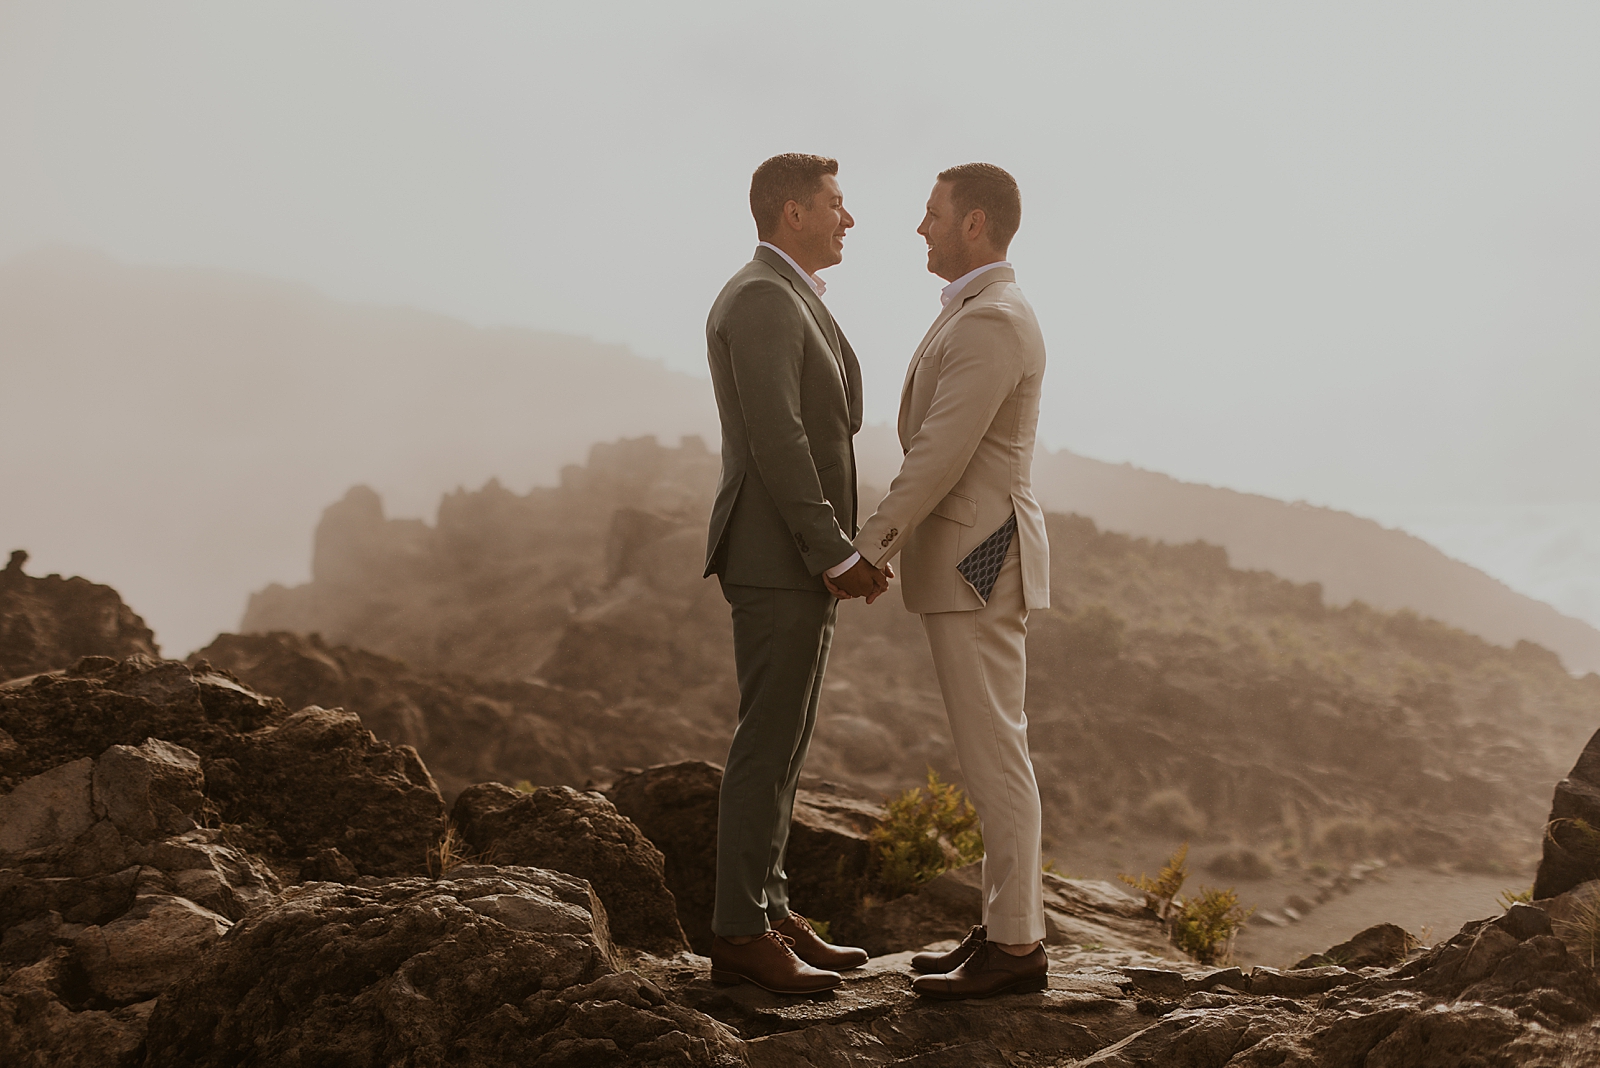 Grooms holding hands and looking at each other while standing on rocks